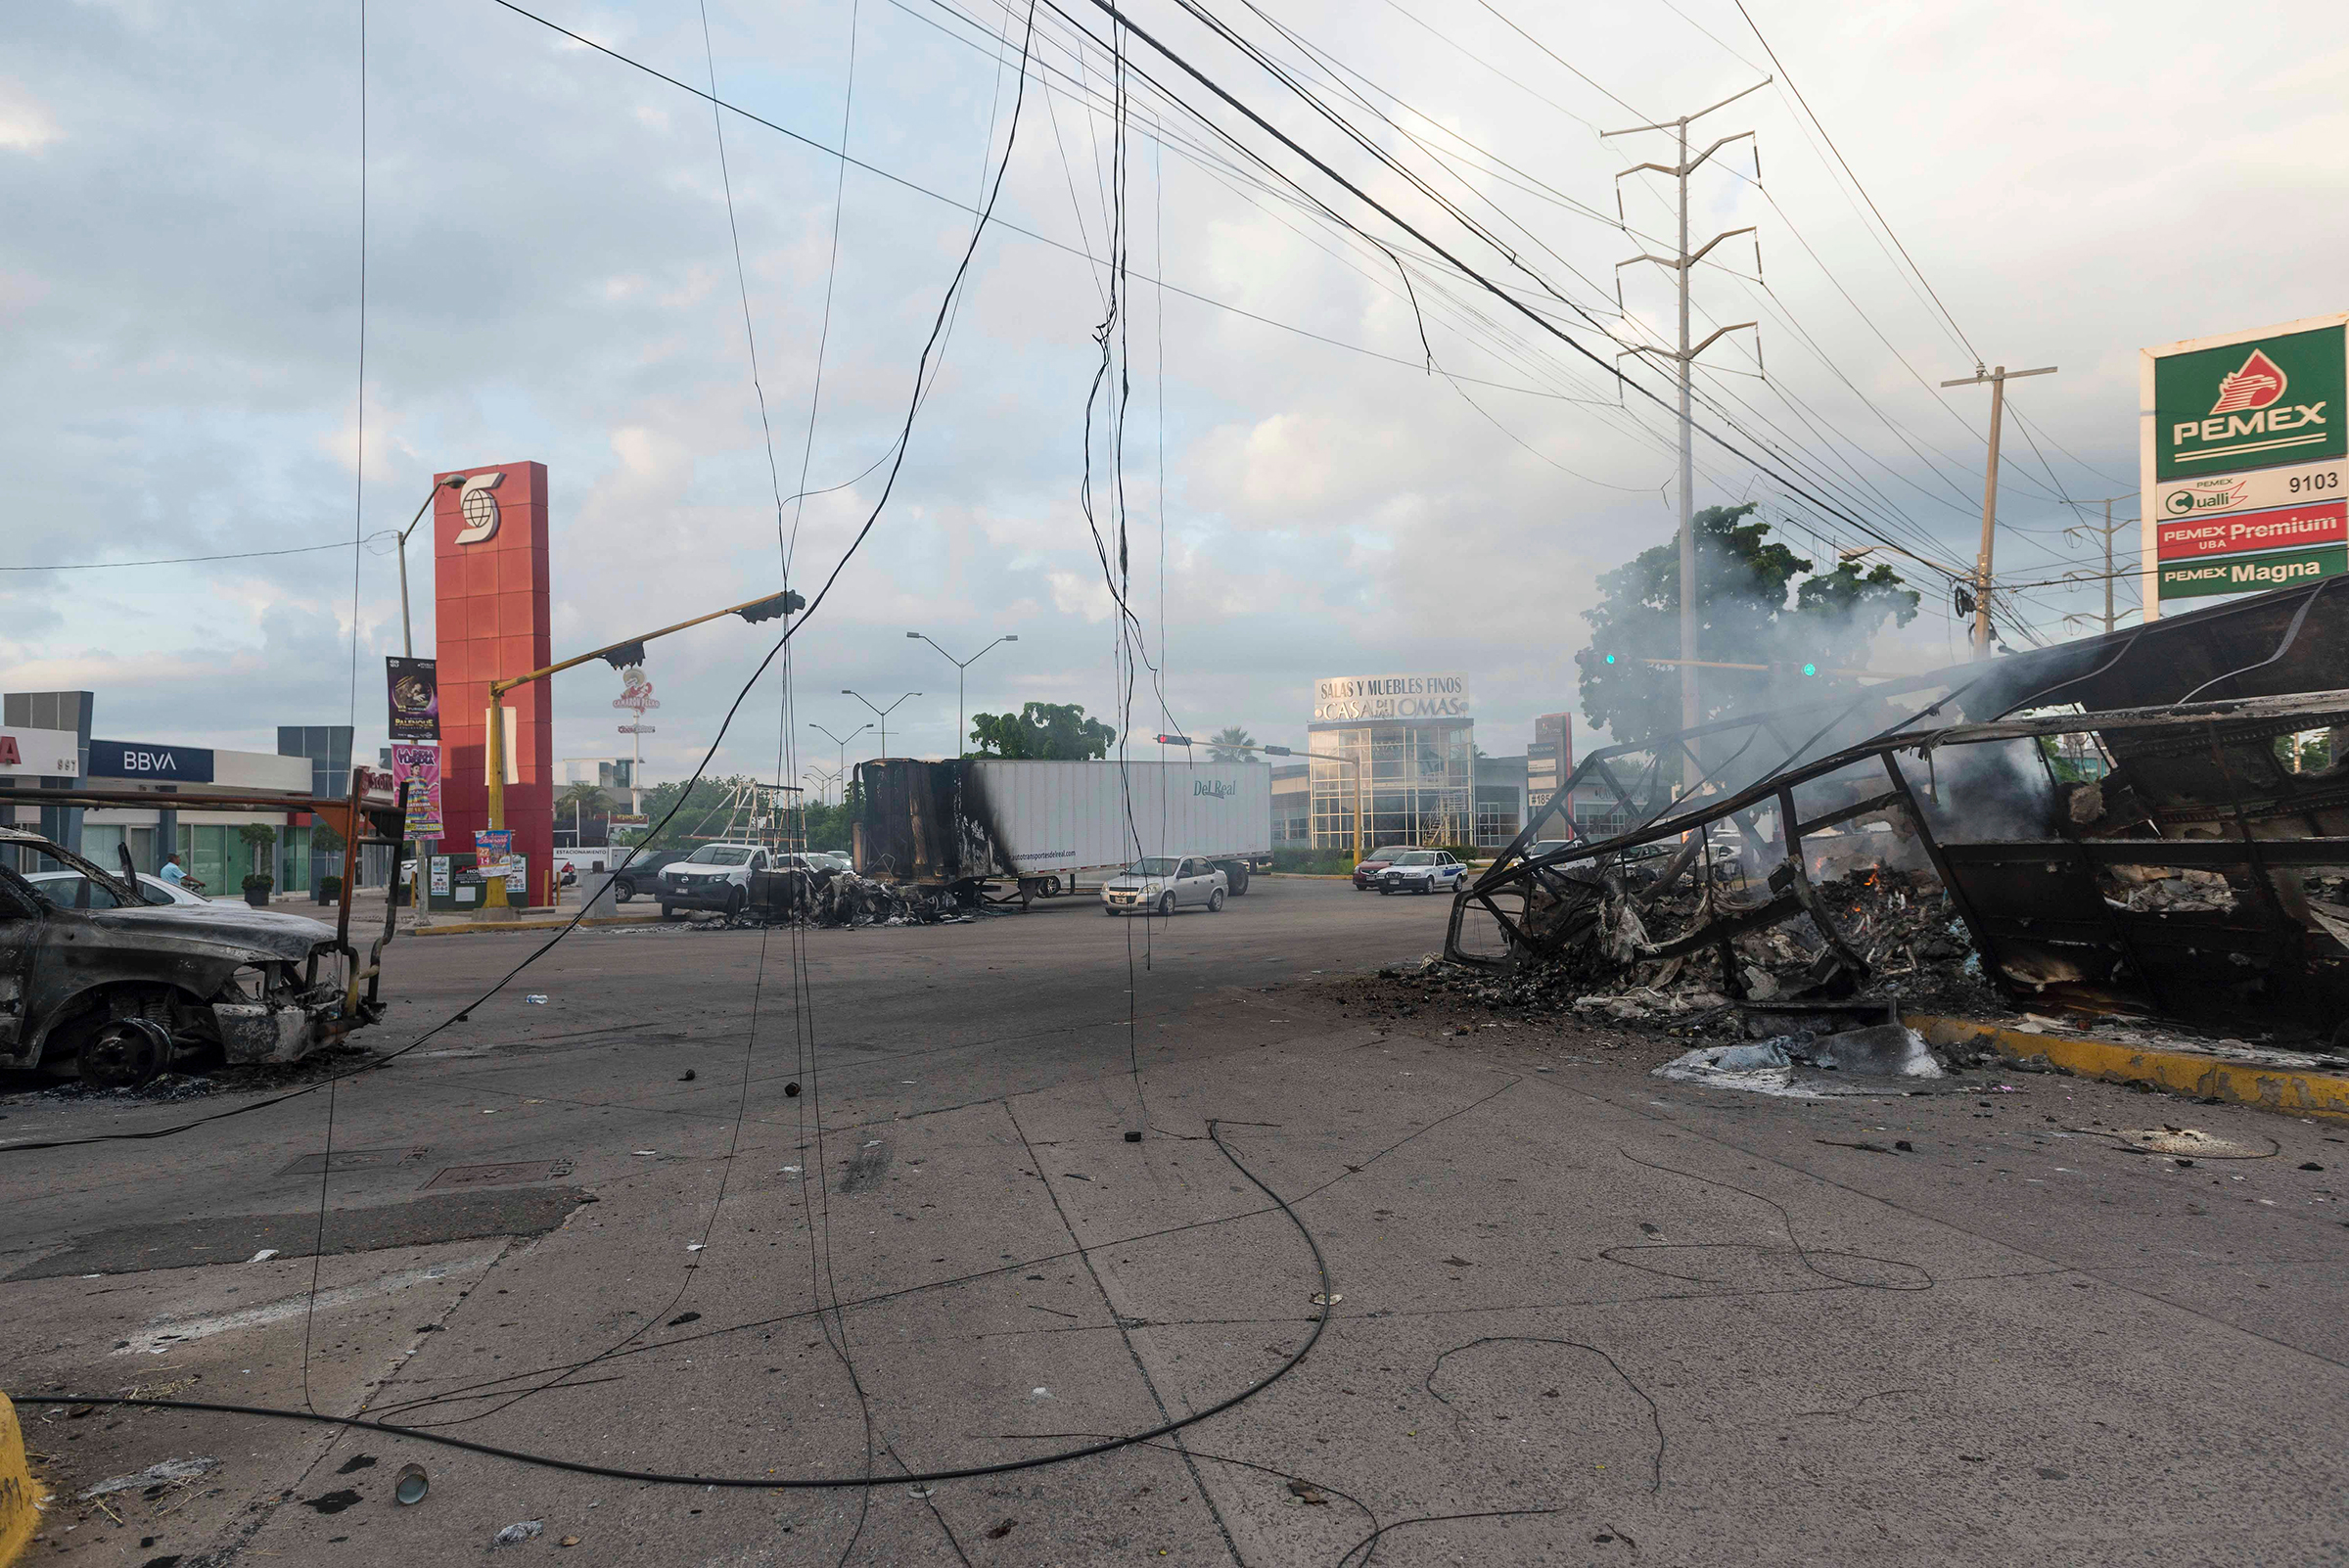 Burnt vehicles used by gunmen smolder on an intersection, one day after street battles with security forces, in Culiacan, Mexico, on Oct. 18, 2019.